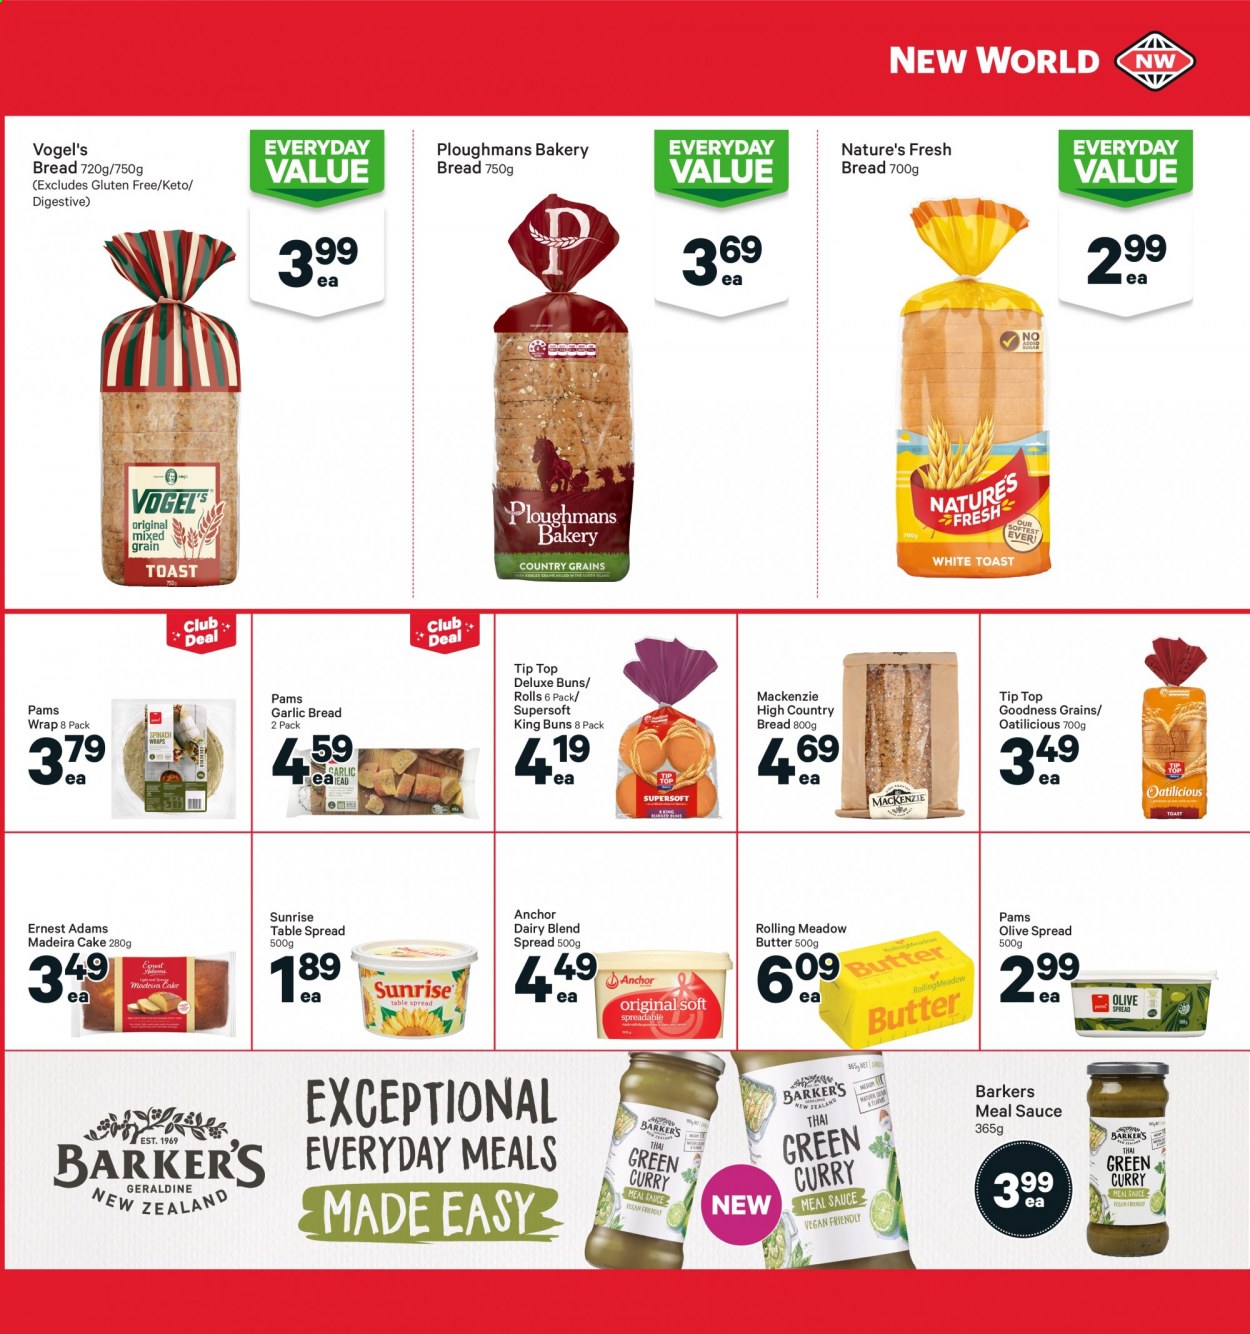 thumbnail - New World mailer - 28.06.2021 - 04.07.2021 - Sales products - bread, cake, Tip Top, buns, burger buns, wraps, madeira cake, sauce, dairy blend, butter, Anchor, spreadable butter, Digestive. Page 13.